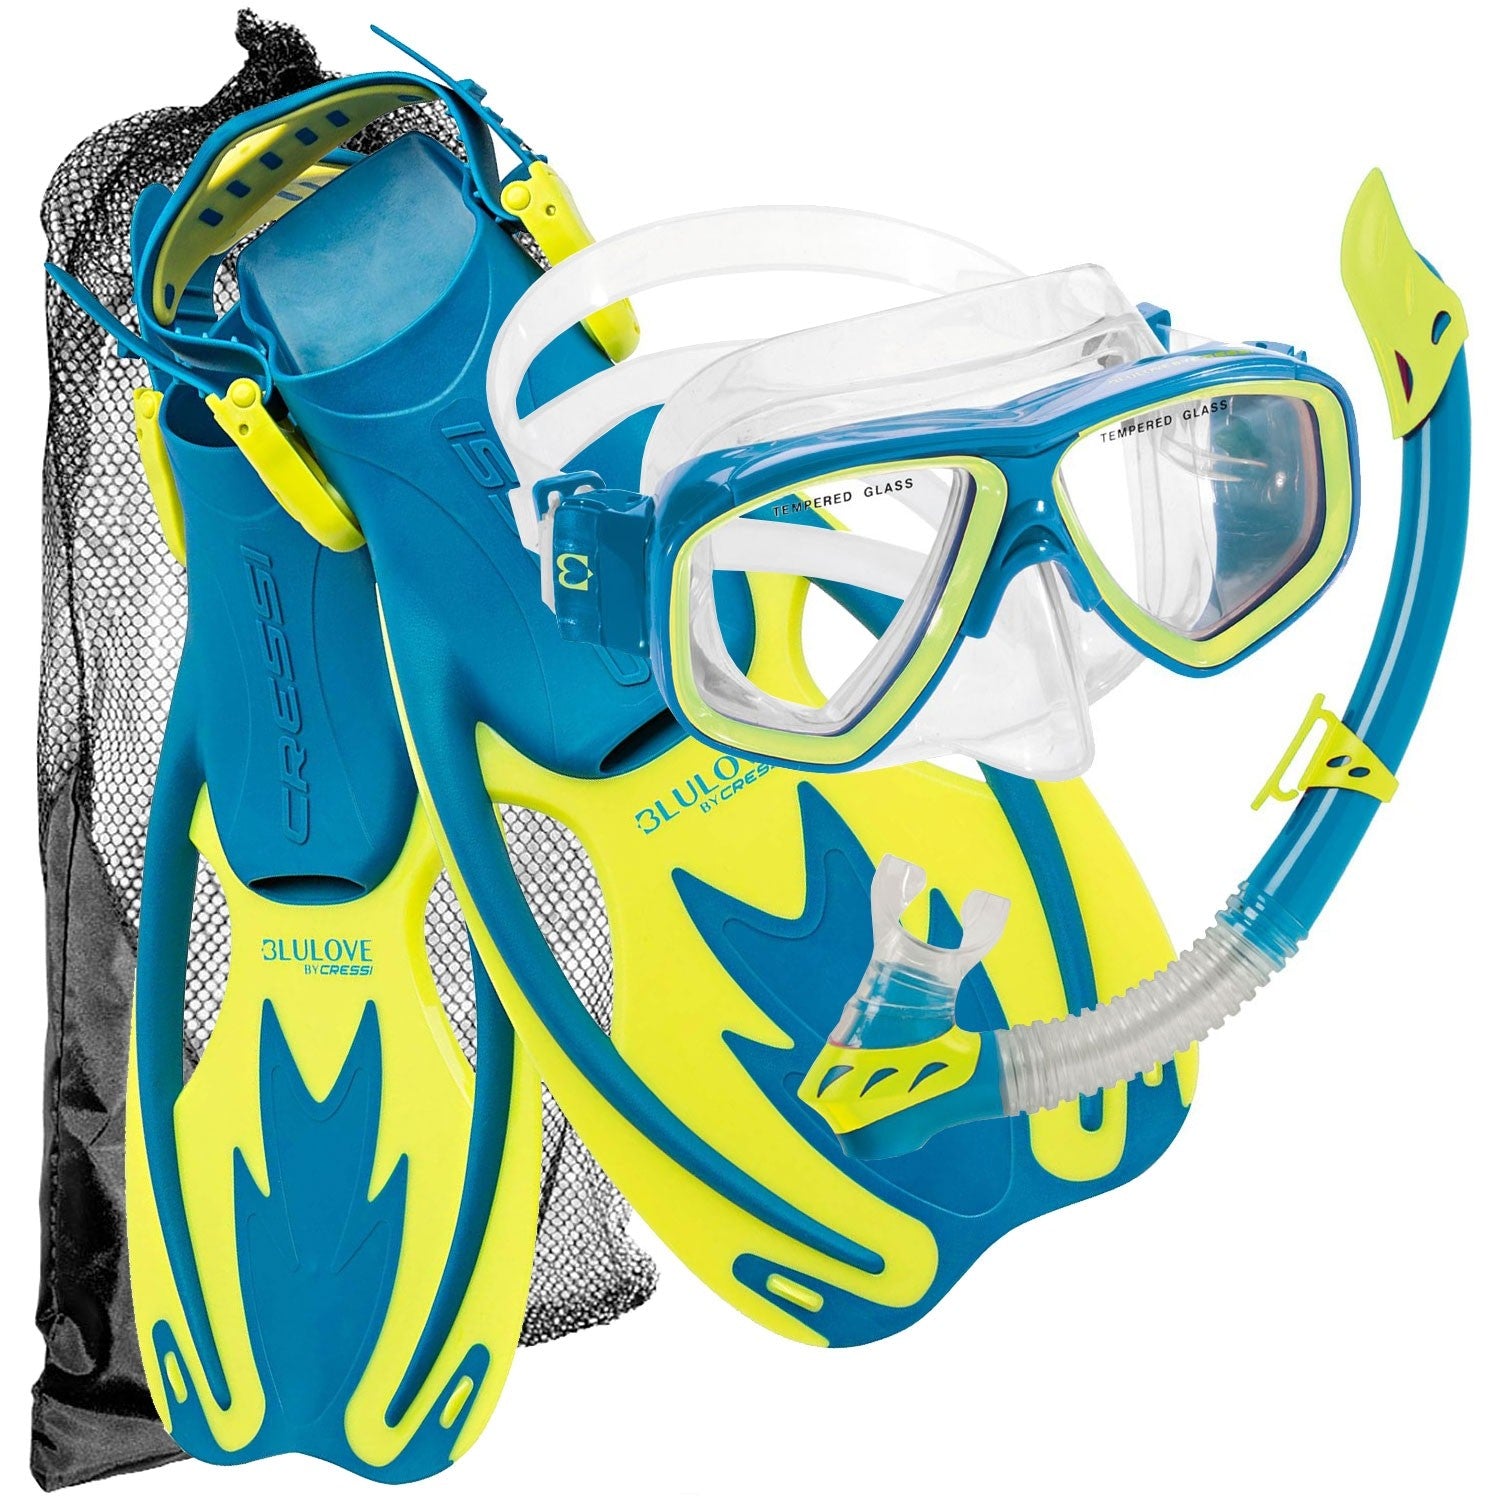 Cressi Junior Snorkeling Kit for Young Aged 3 to 10 - Mask + Dry Snorkel +  Adjustable Fins + Net Bag - Lightweight Colorful Equipment - Rocks Pro Dry